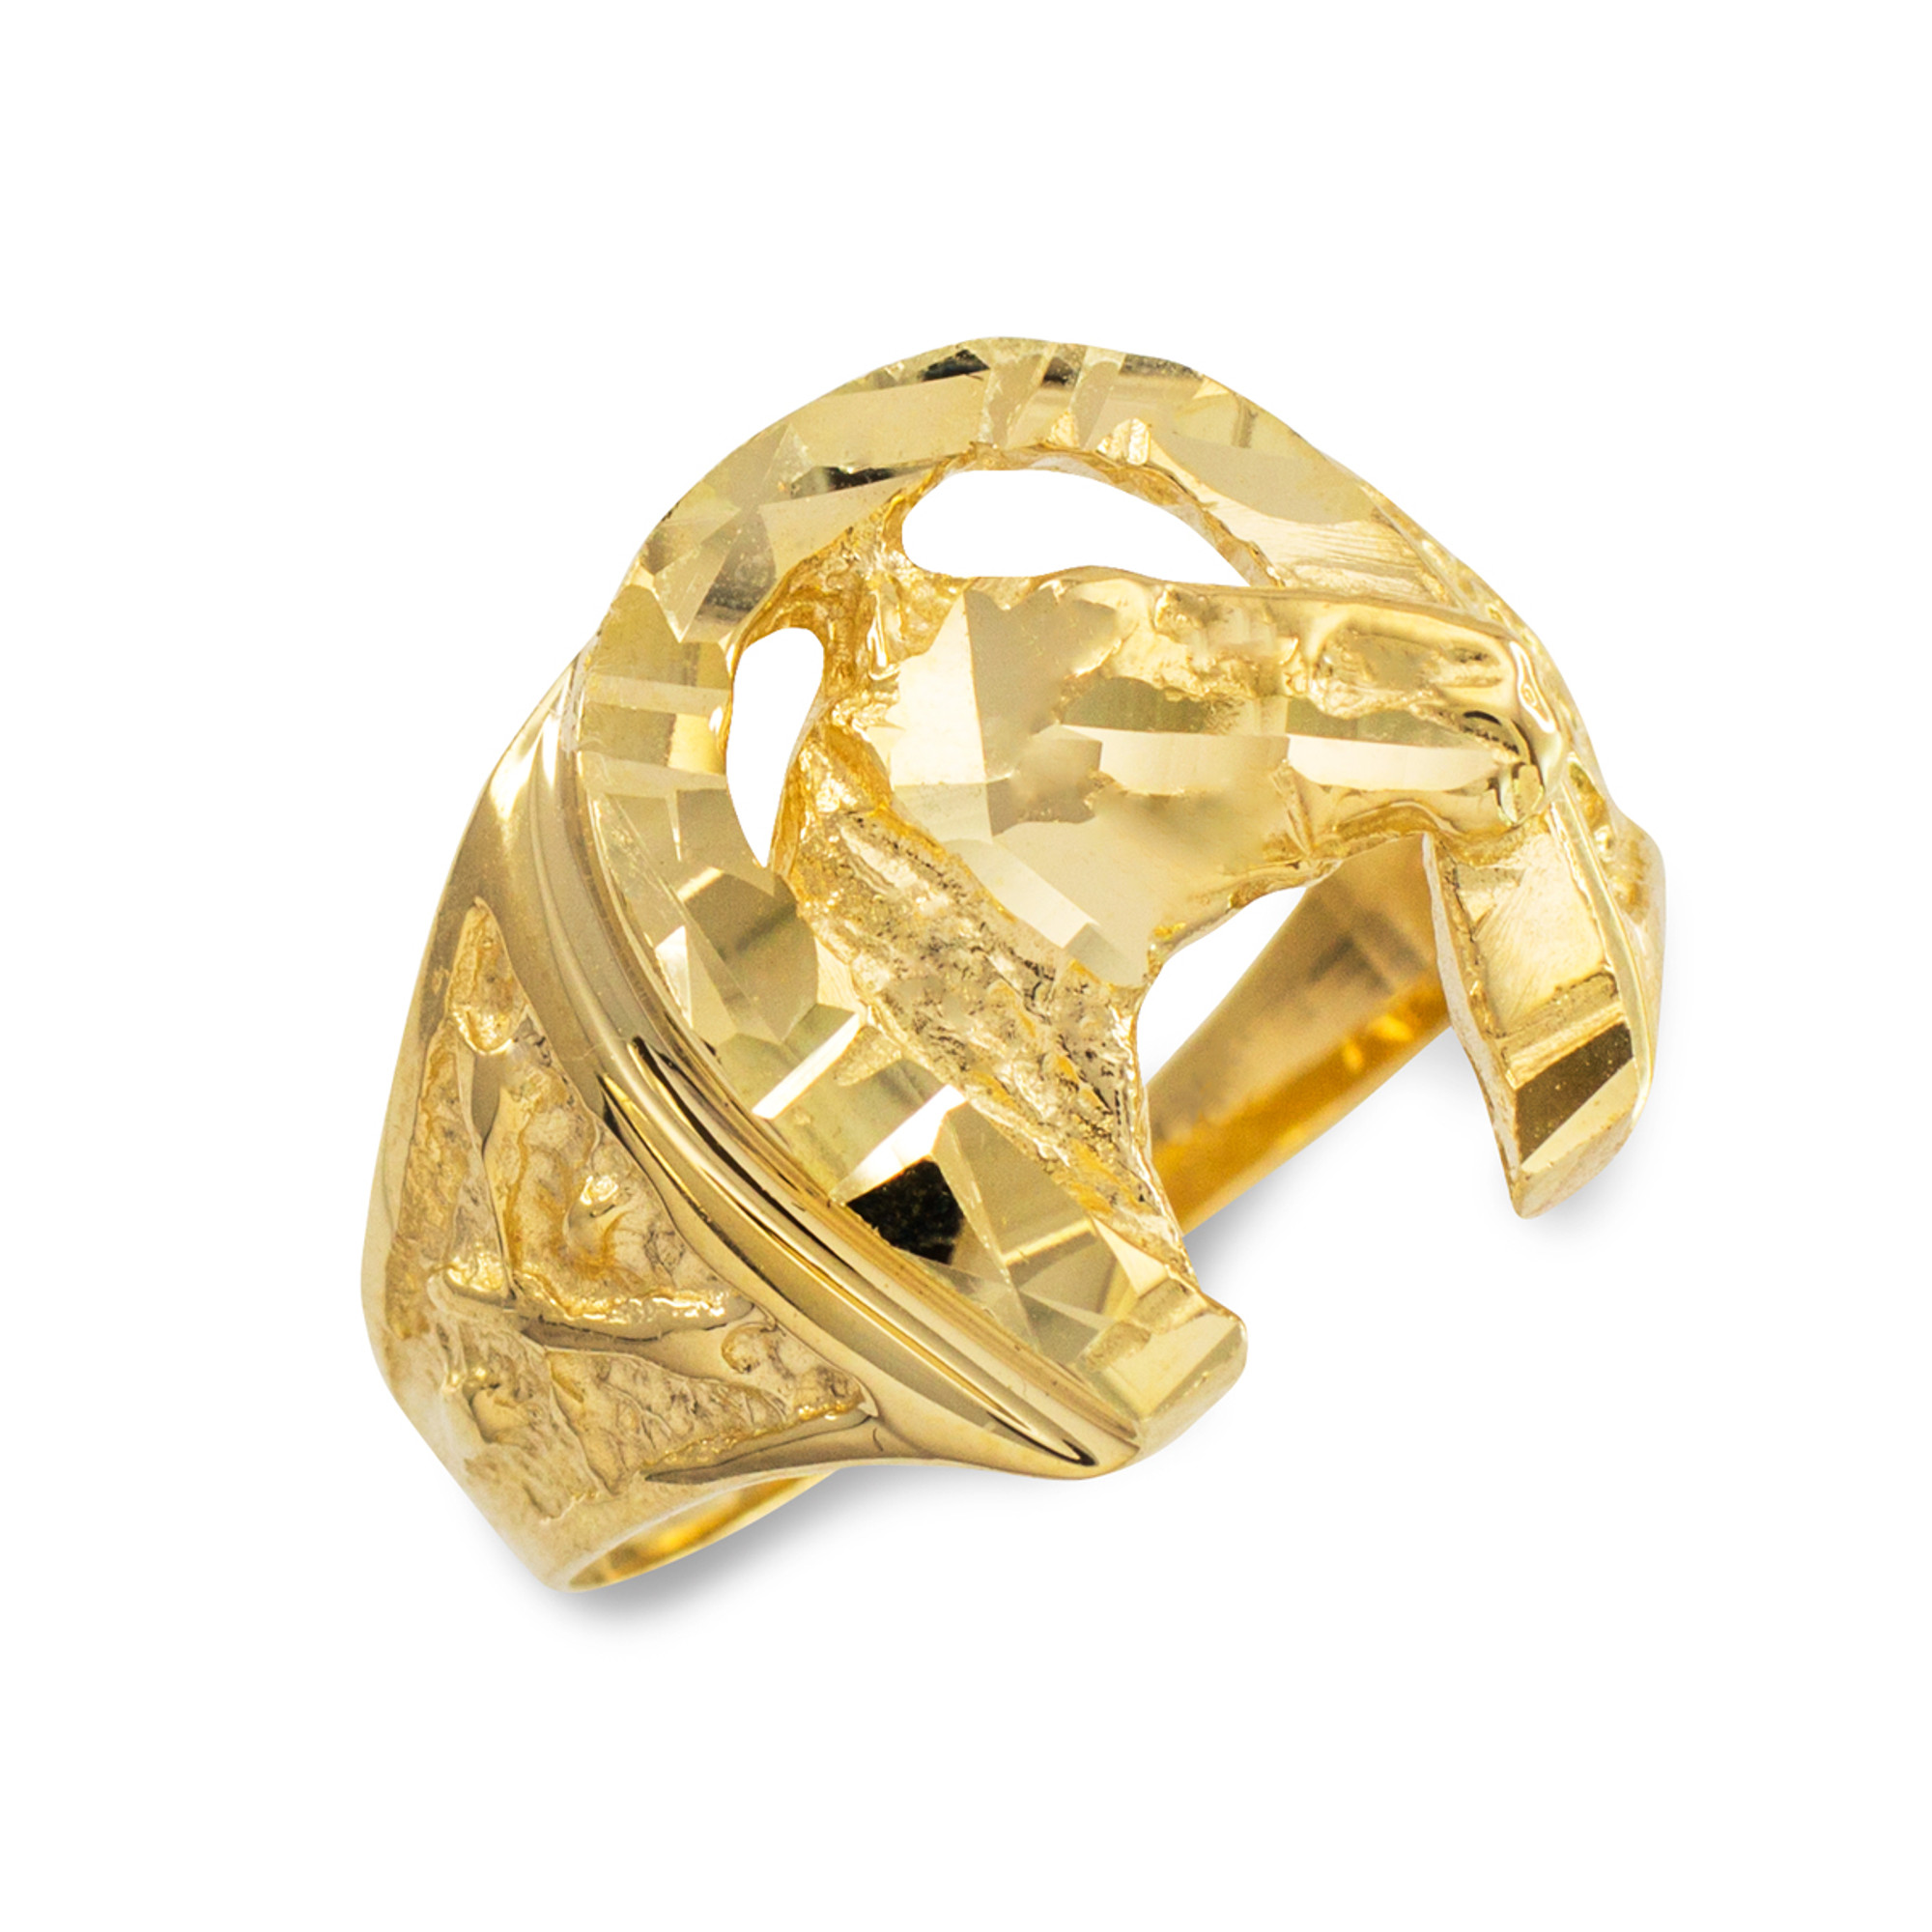 Buy Vintage 24K 980 Solid Gold Horse Ring Size 6 Online in India - Etsy